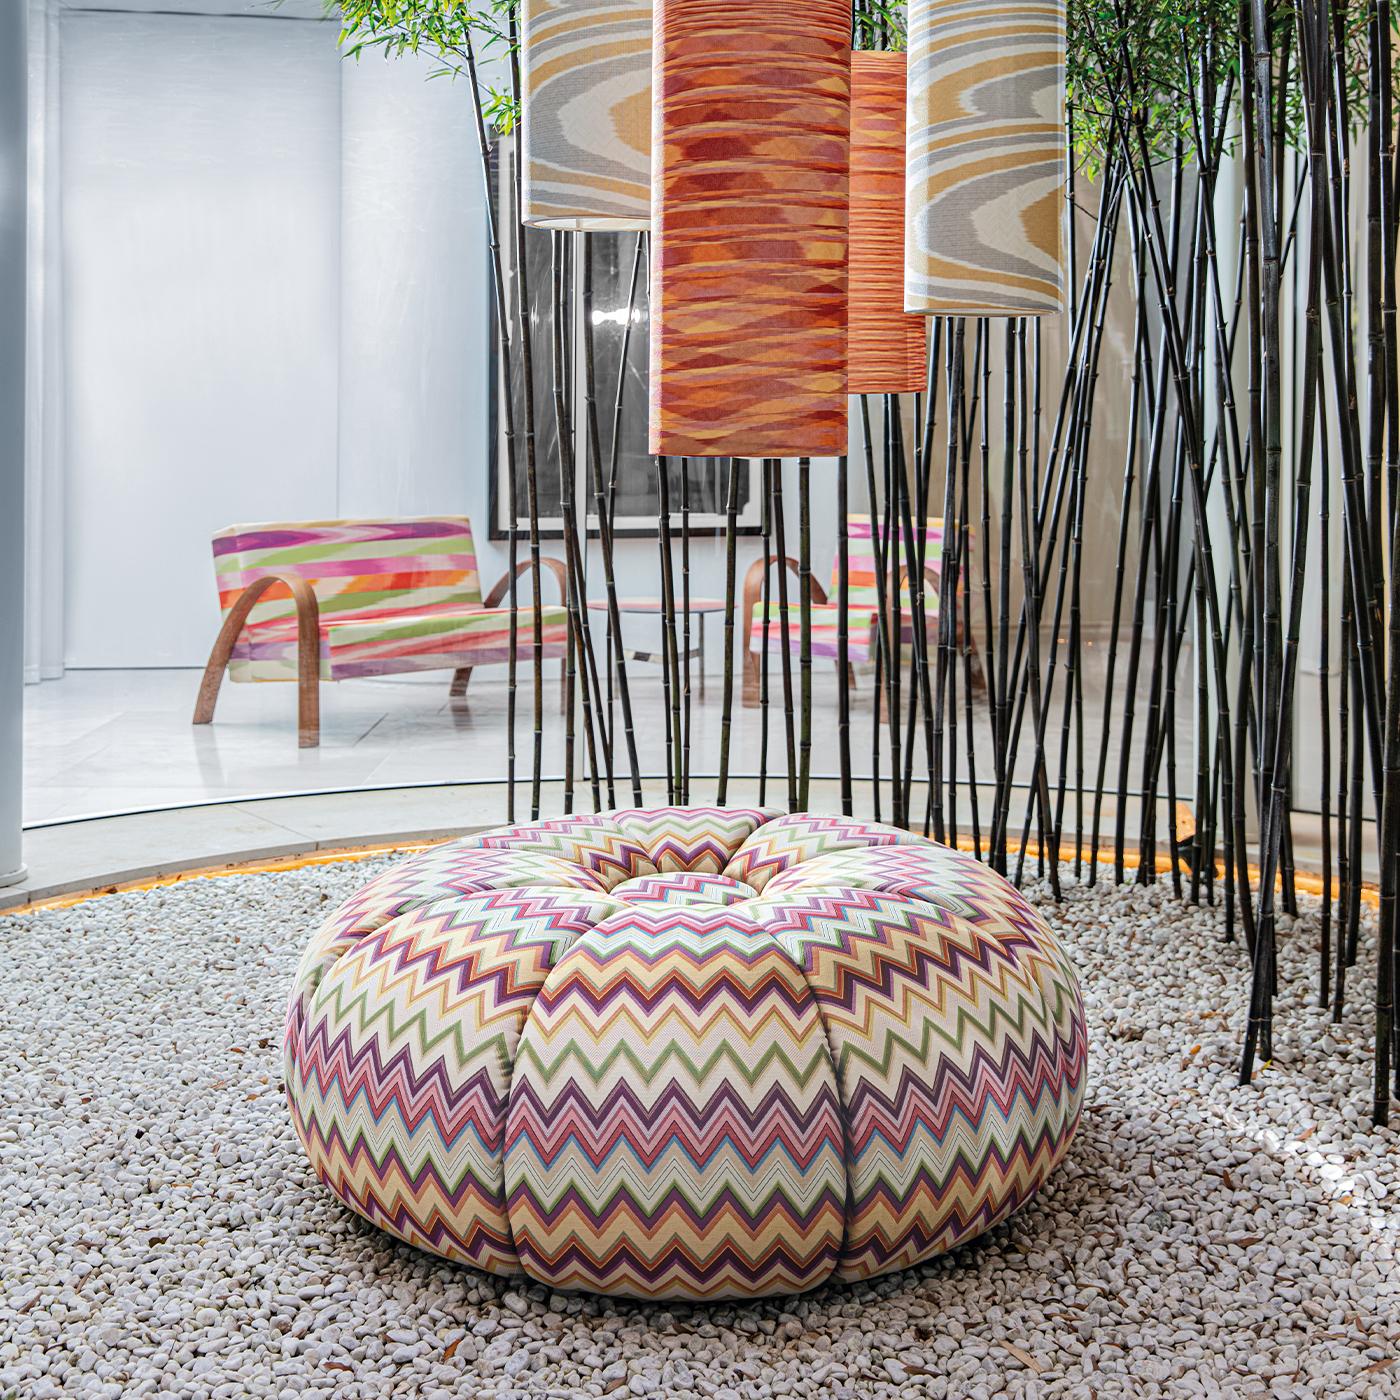 Showcasing a unique and inimitable character of bold and iconic flair, this exceptional pouf combines an inventive aesthetic with a highly comfortable shape. Inspired by the abundantly padded silhouette of a pincushion, it is composed of soft slices